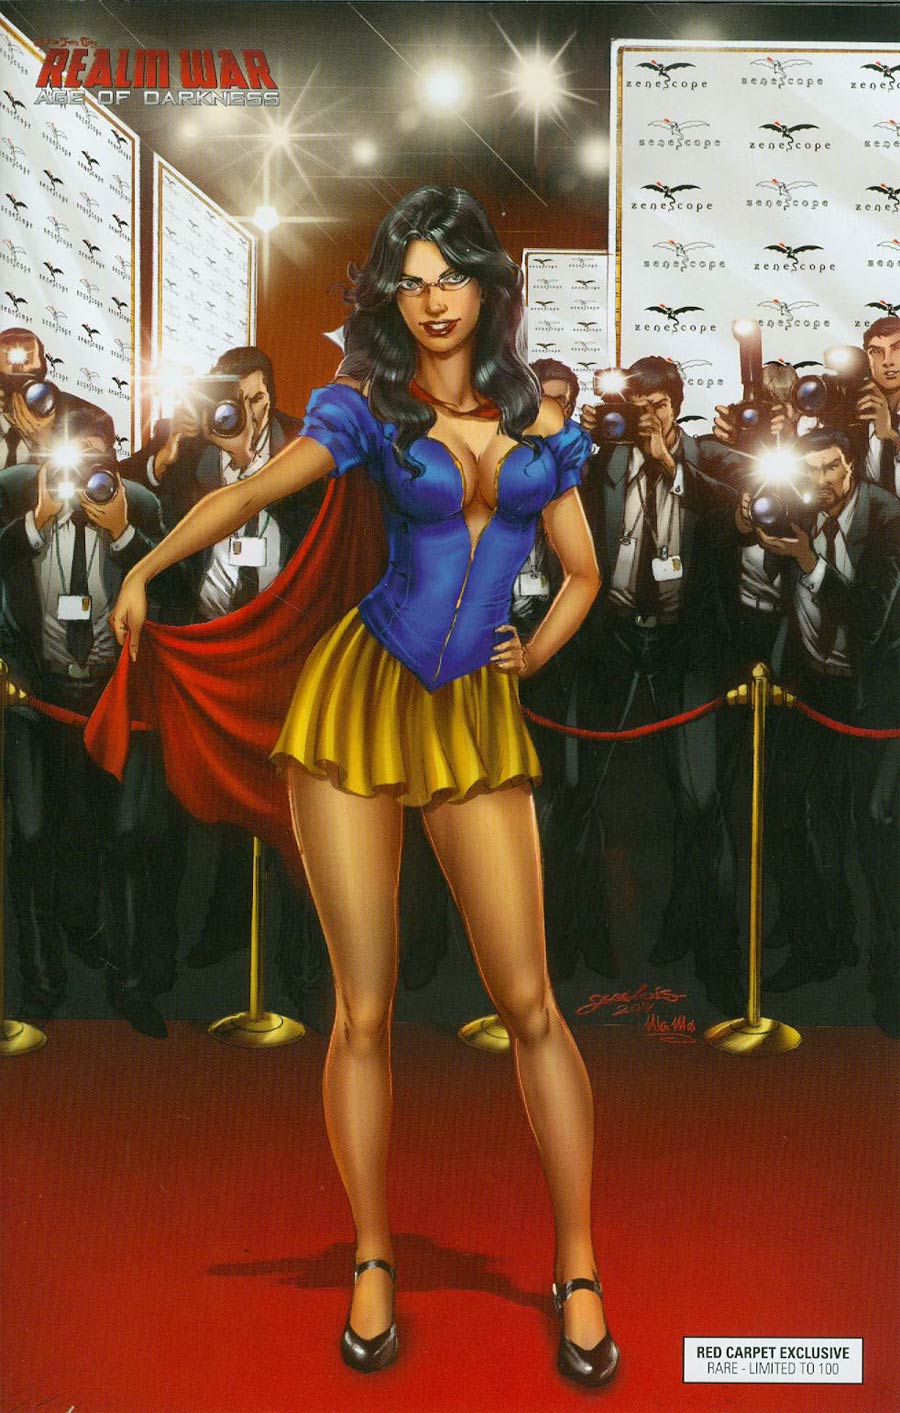 Grimm Fairy Tales Presents Realm War #1 Cover I Red Carpet Exclusive Jose Luis Yellow Skirt Variant Cover (Age Of Darkness Tie-In)